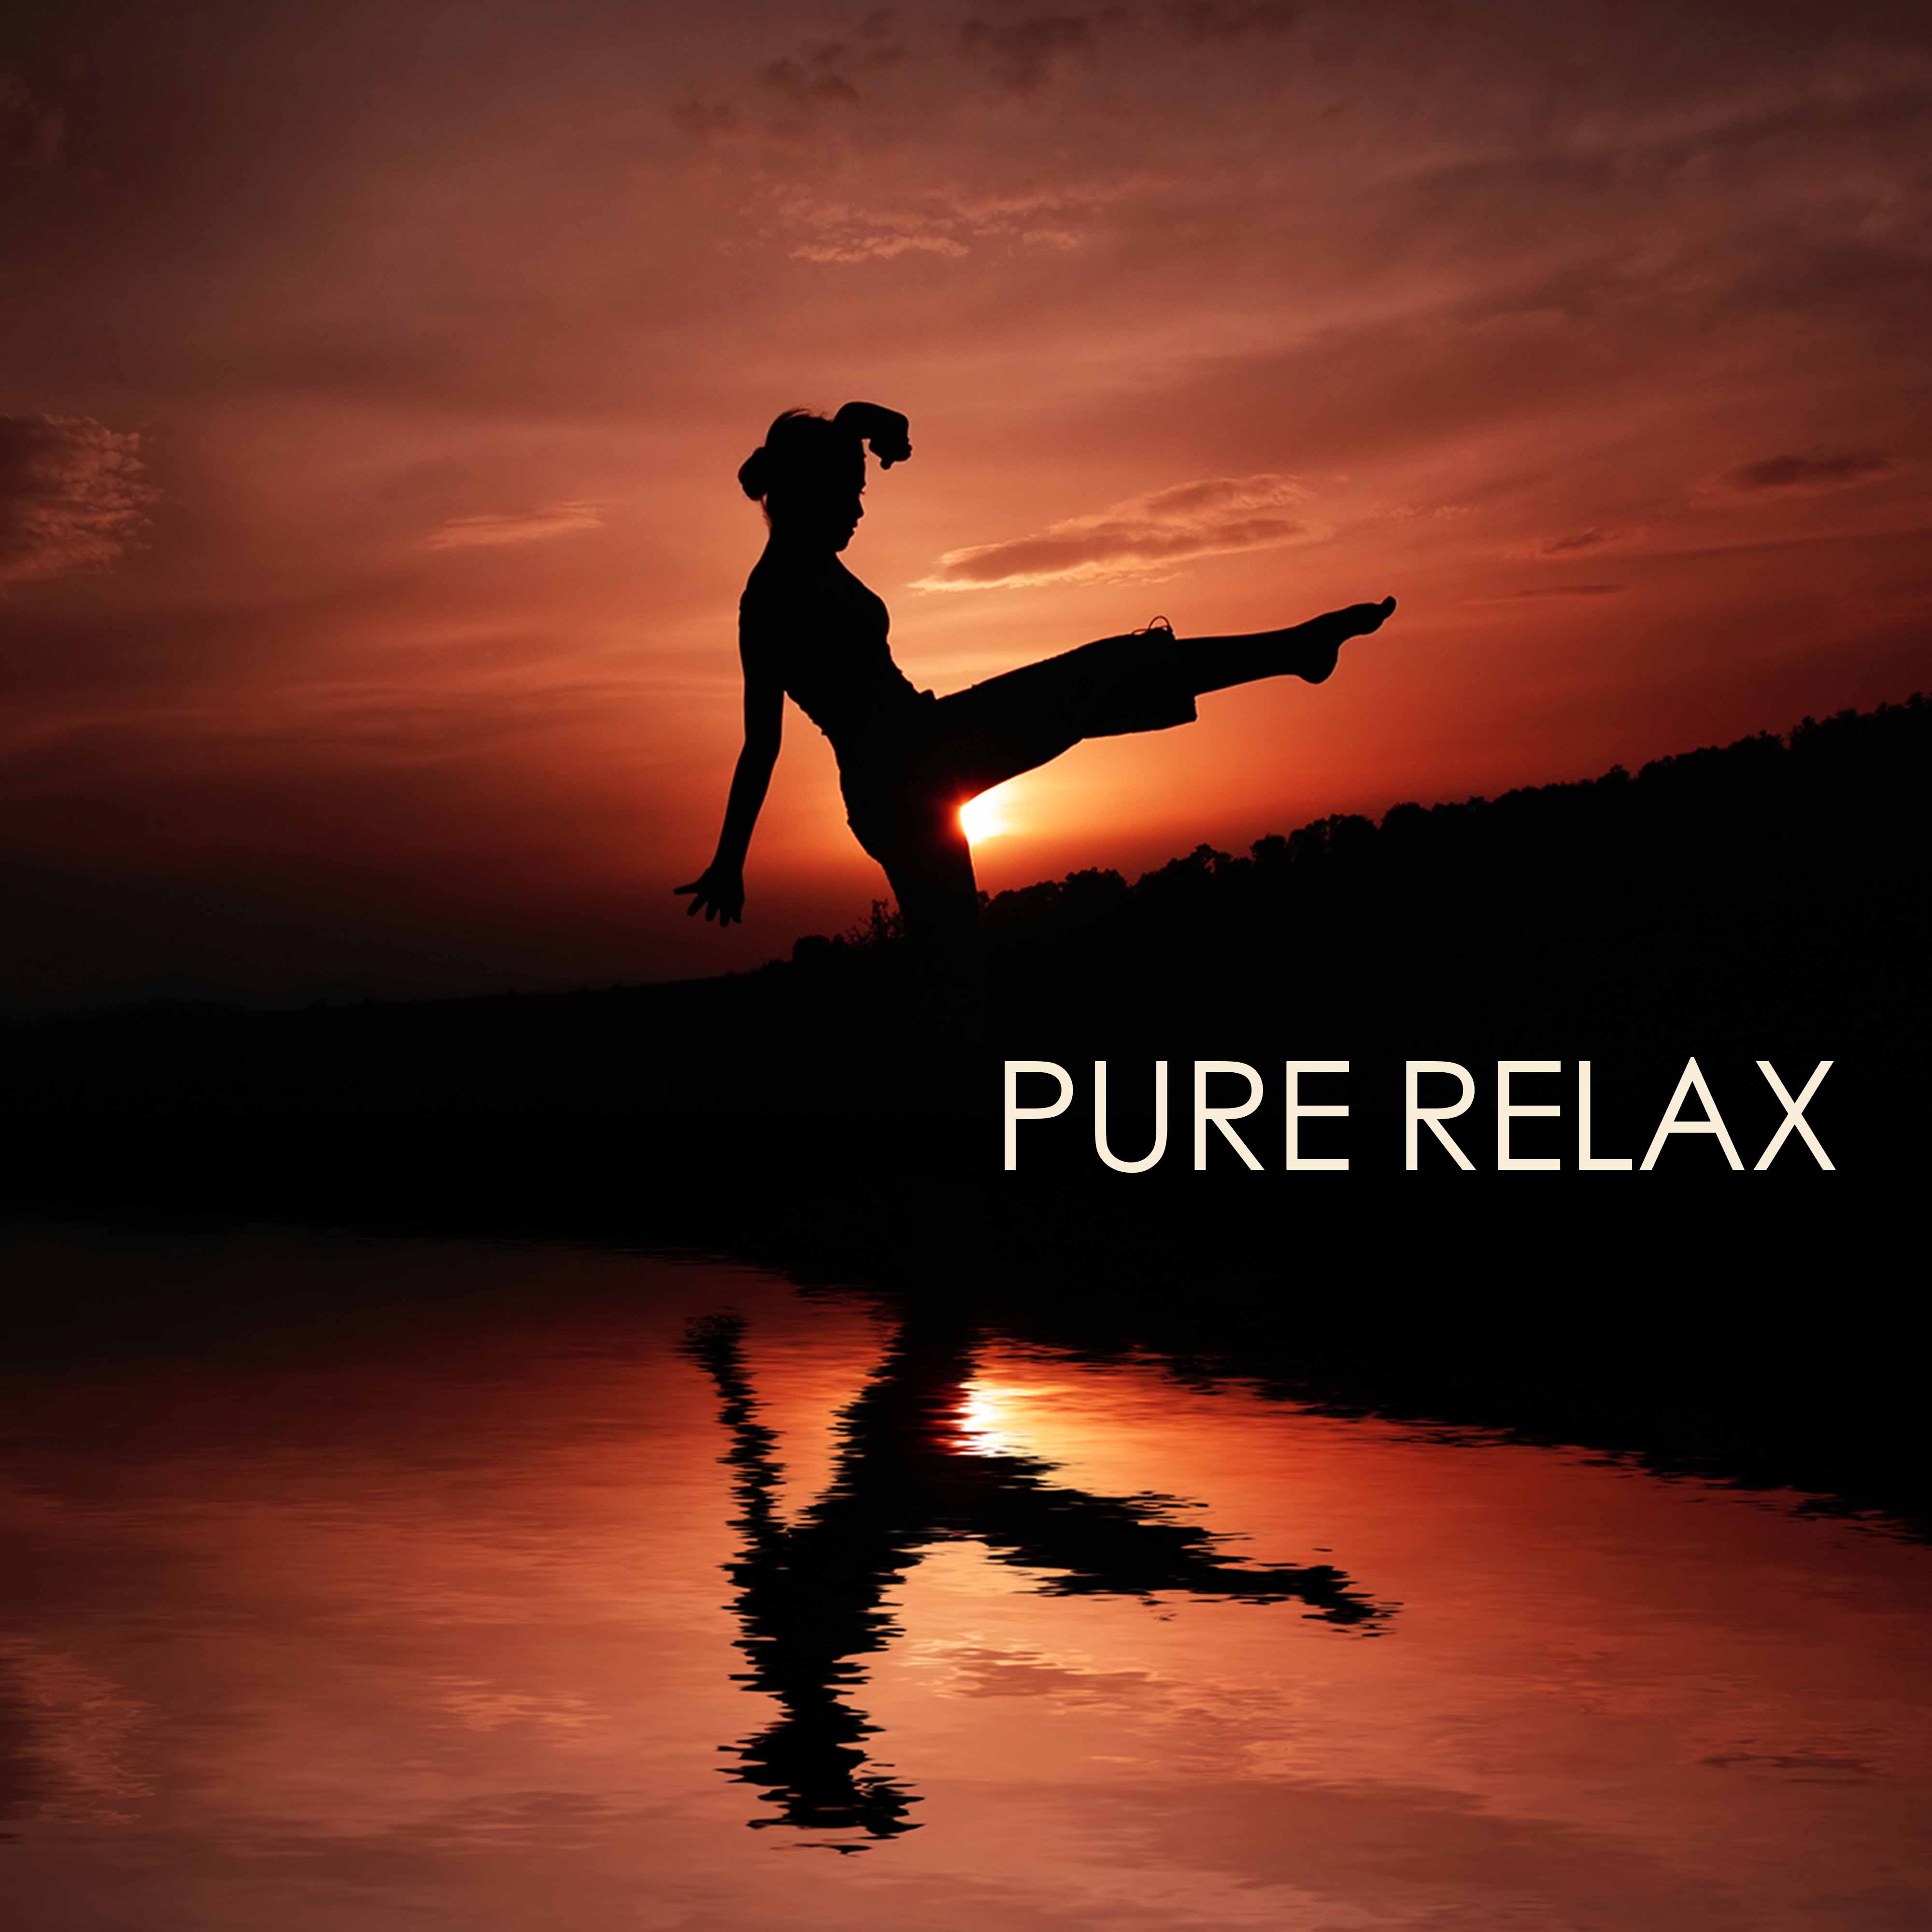 Pure Relax: Meditation & New Age Harmony, Peaceful Music Relaxation, Sound Therapy 4 Wellbeing, Breathing Exercises & Yoga Experience